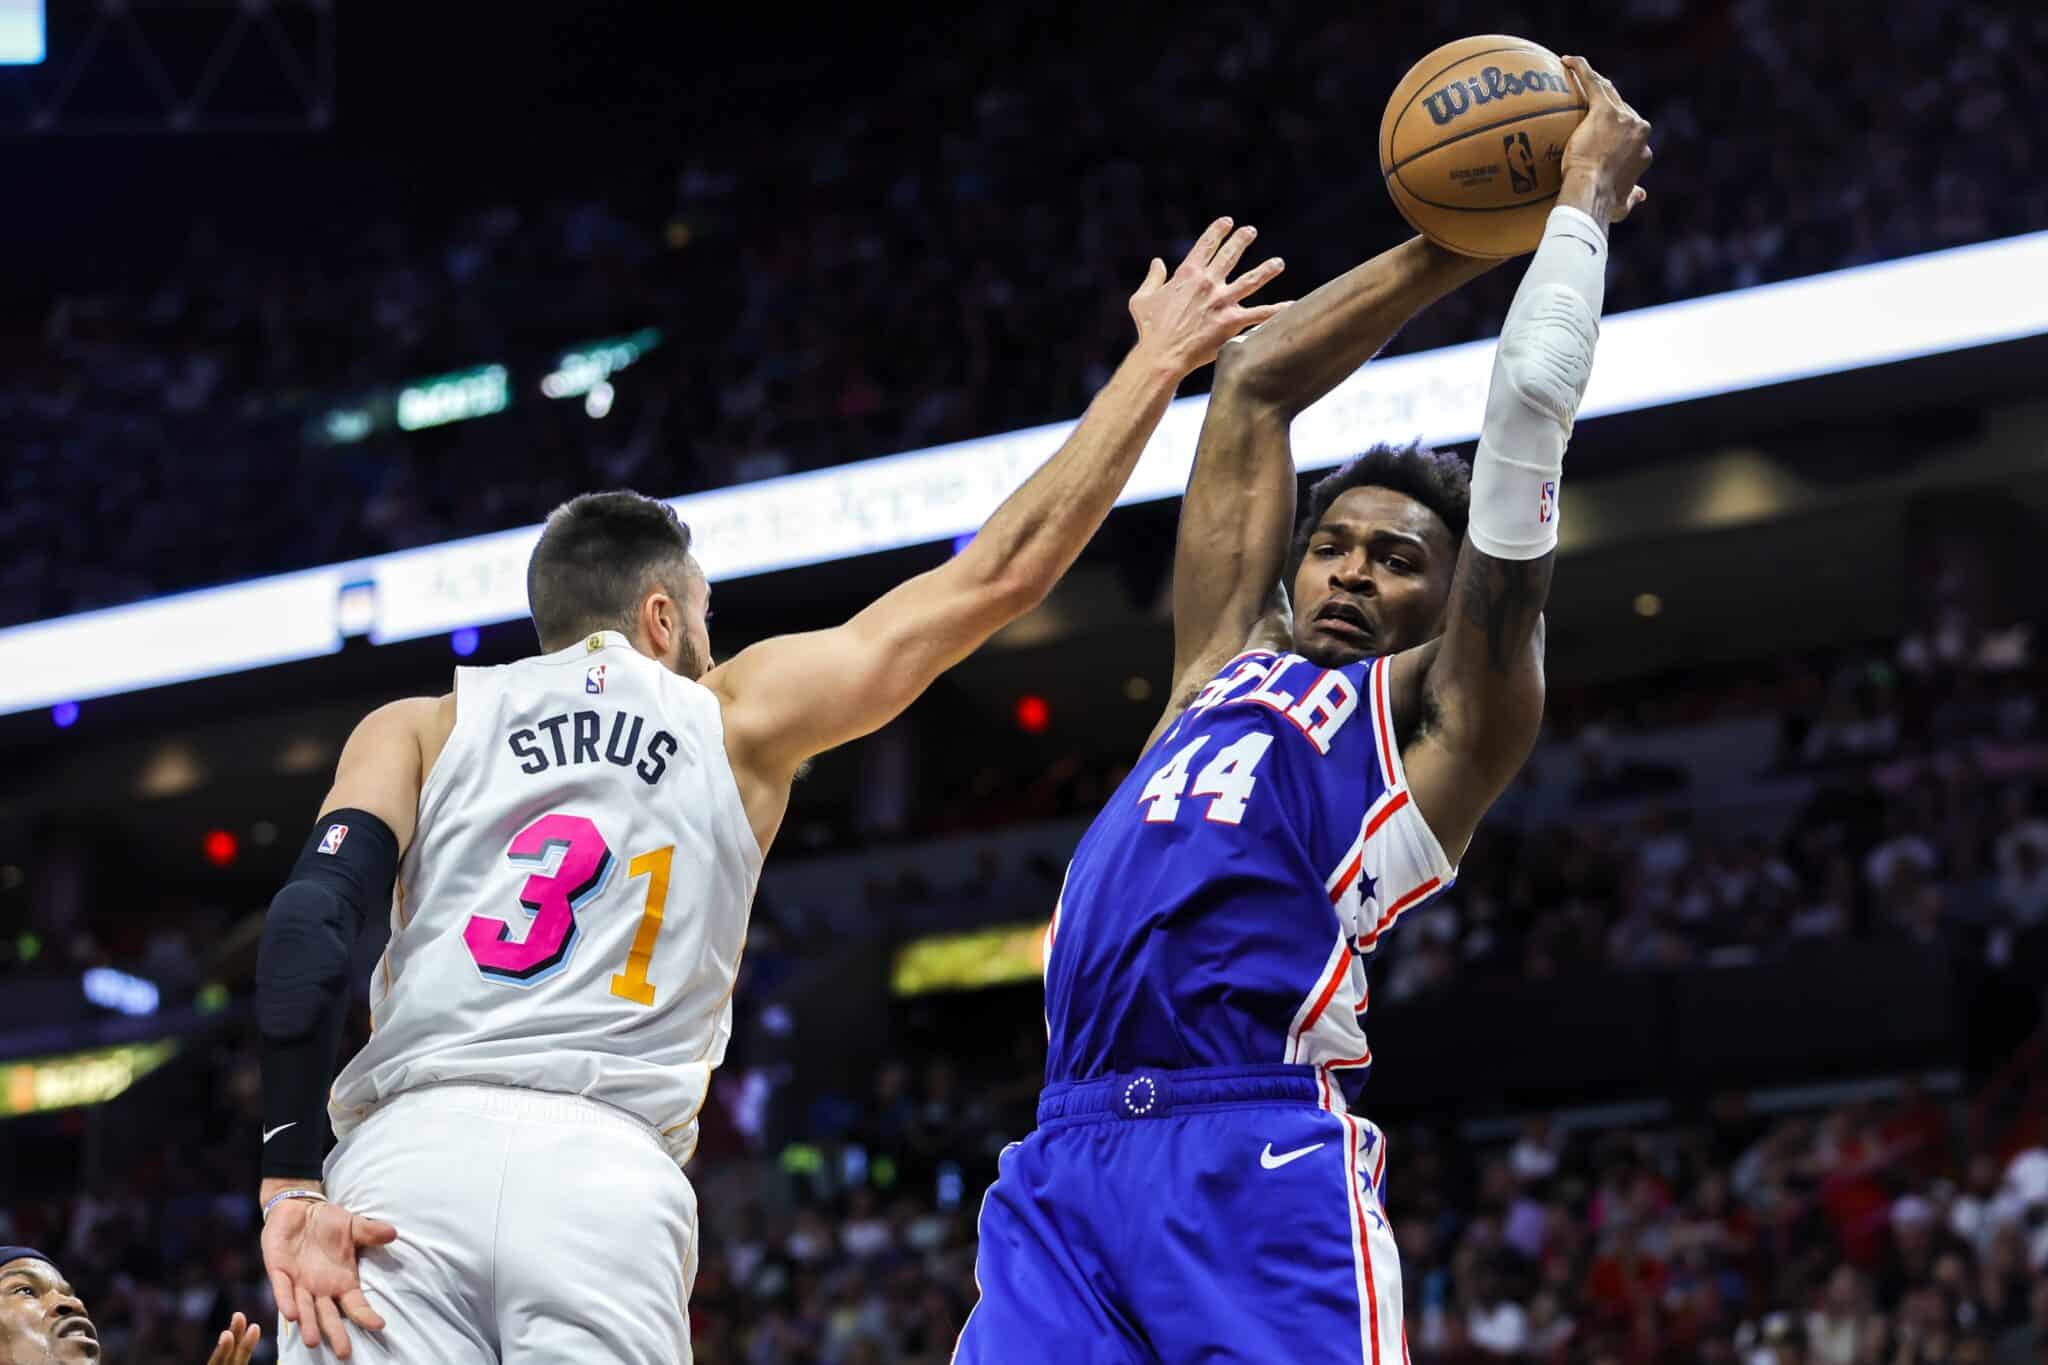 Miami’s Run Shows the Sixers (and the Rest of the NBA) that Two-Way Players Can Make It